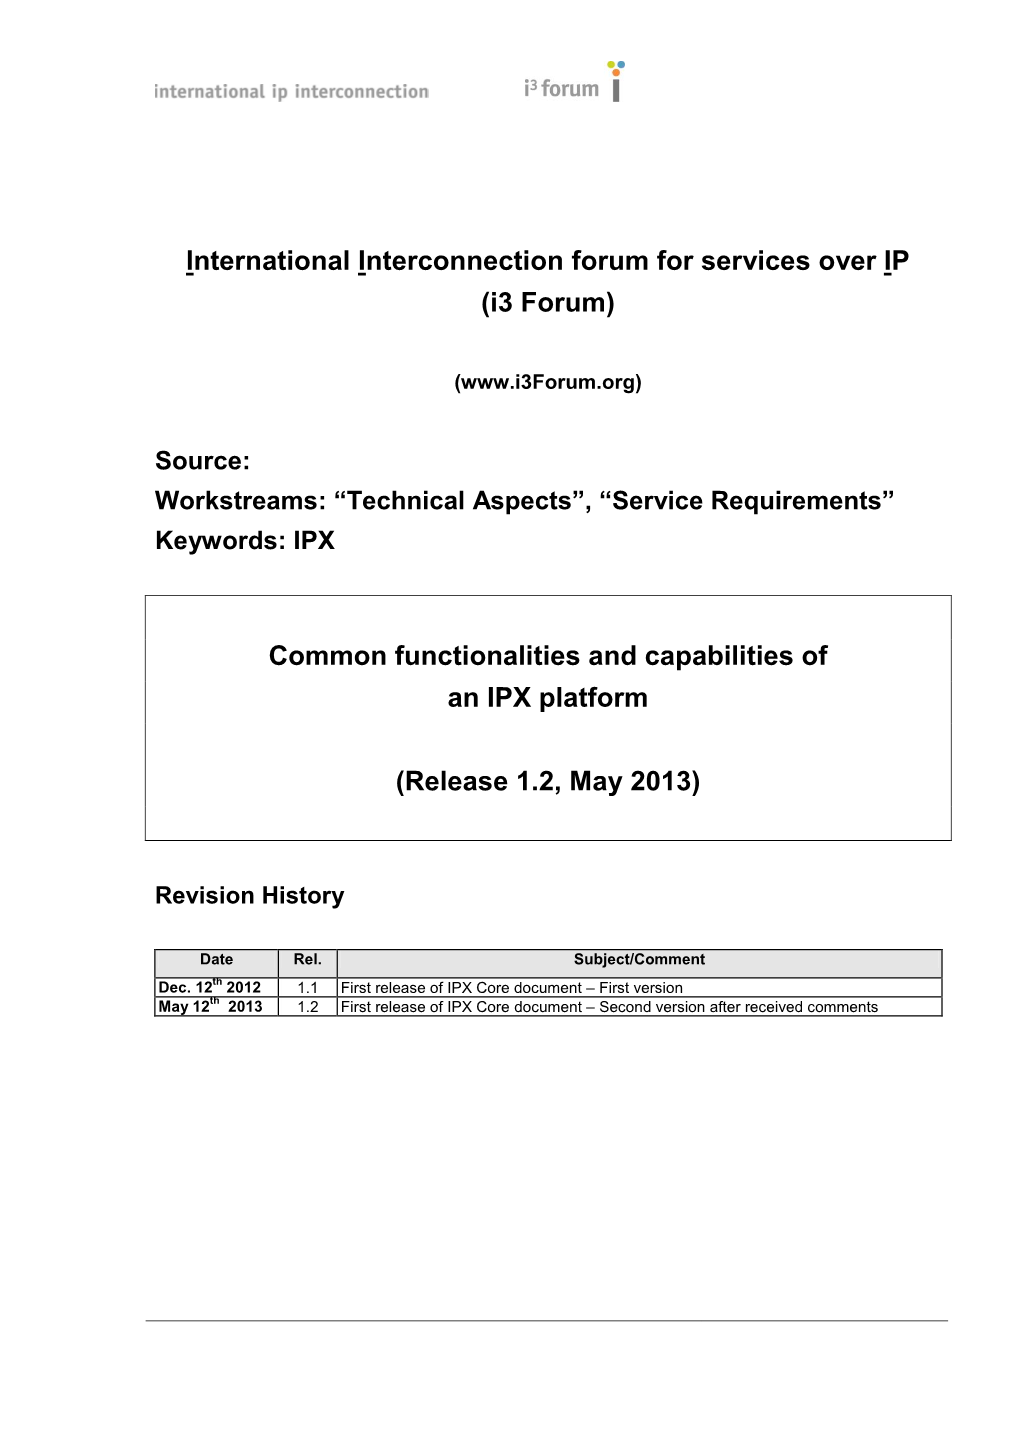 International Interconnection Forum for Services Over IP (I3 Forum)